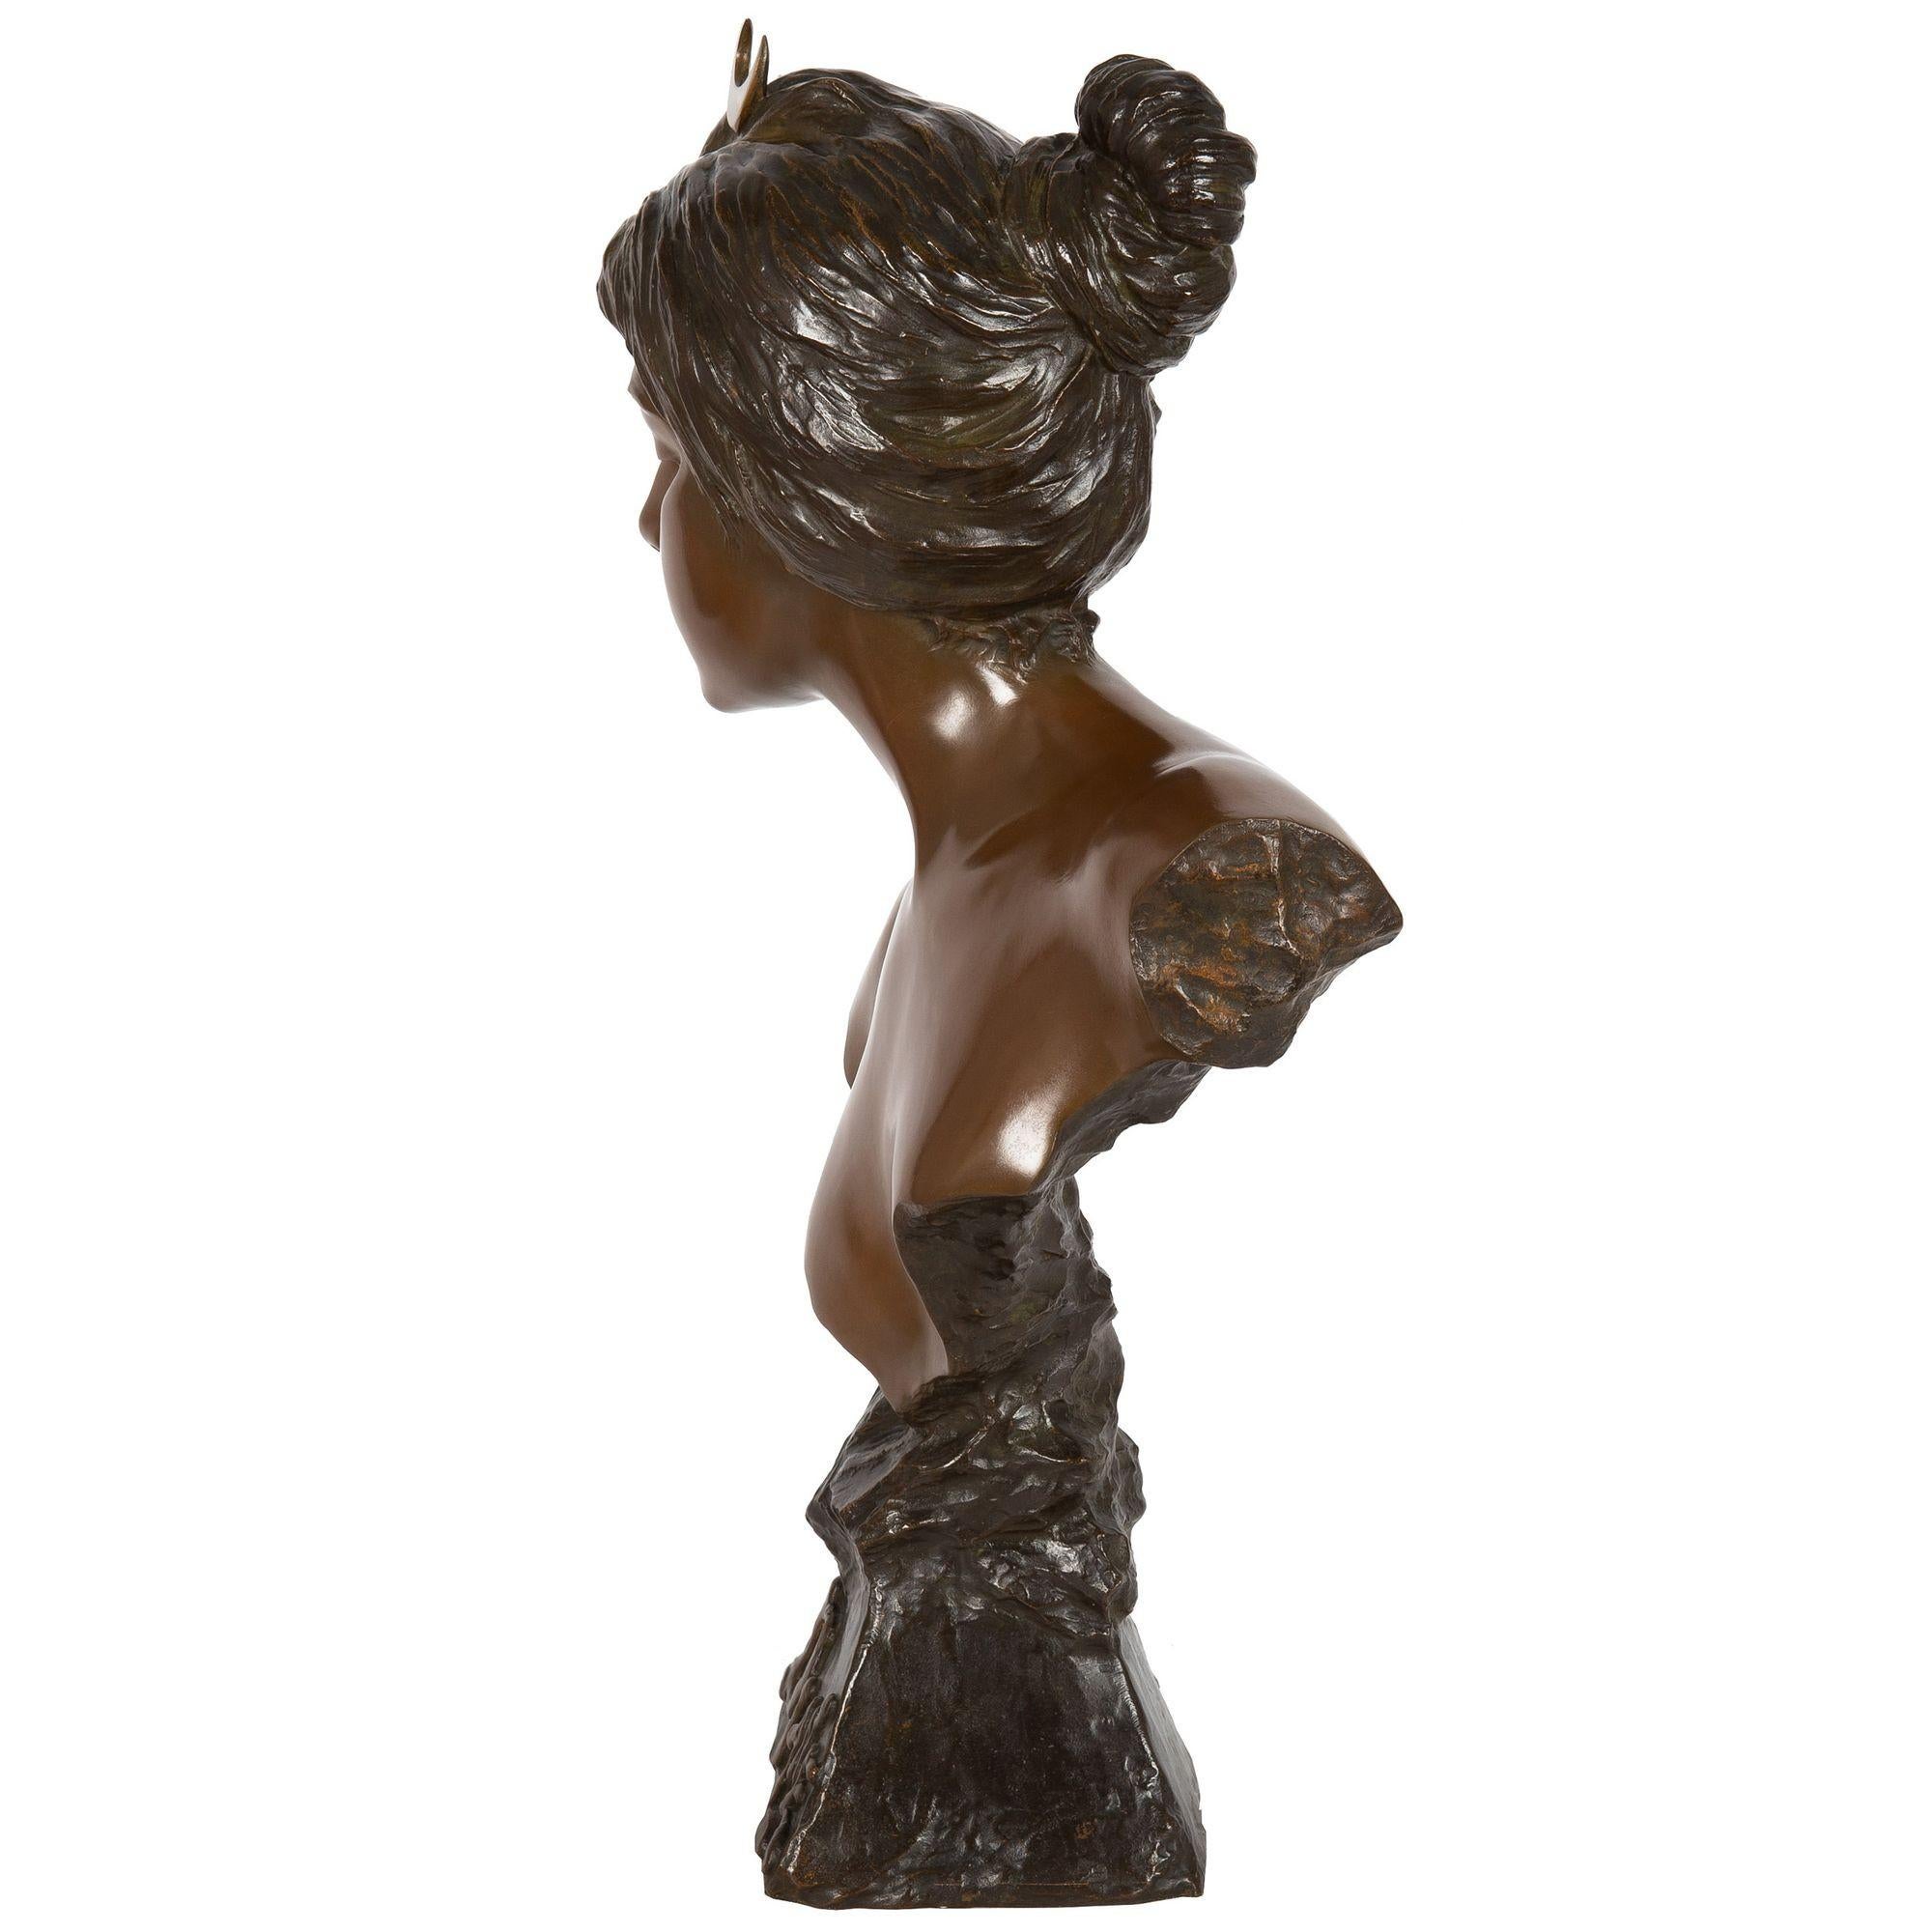 French Art Nouveau Bronze Sculpture “Bust of Diana” by Emmanuel Villanis In Good Condition For Sale In Shippensburg, PA